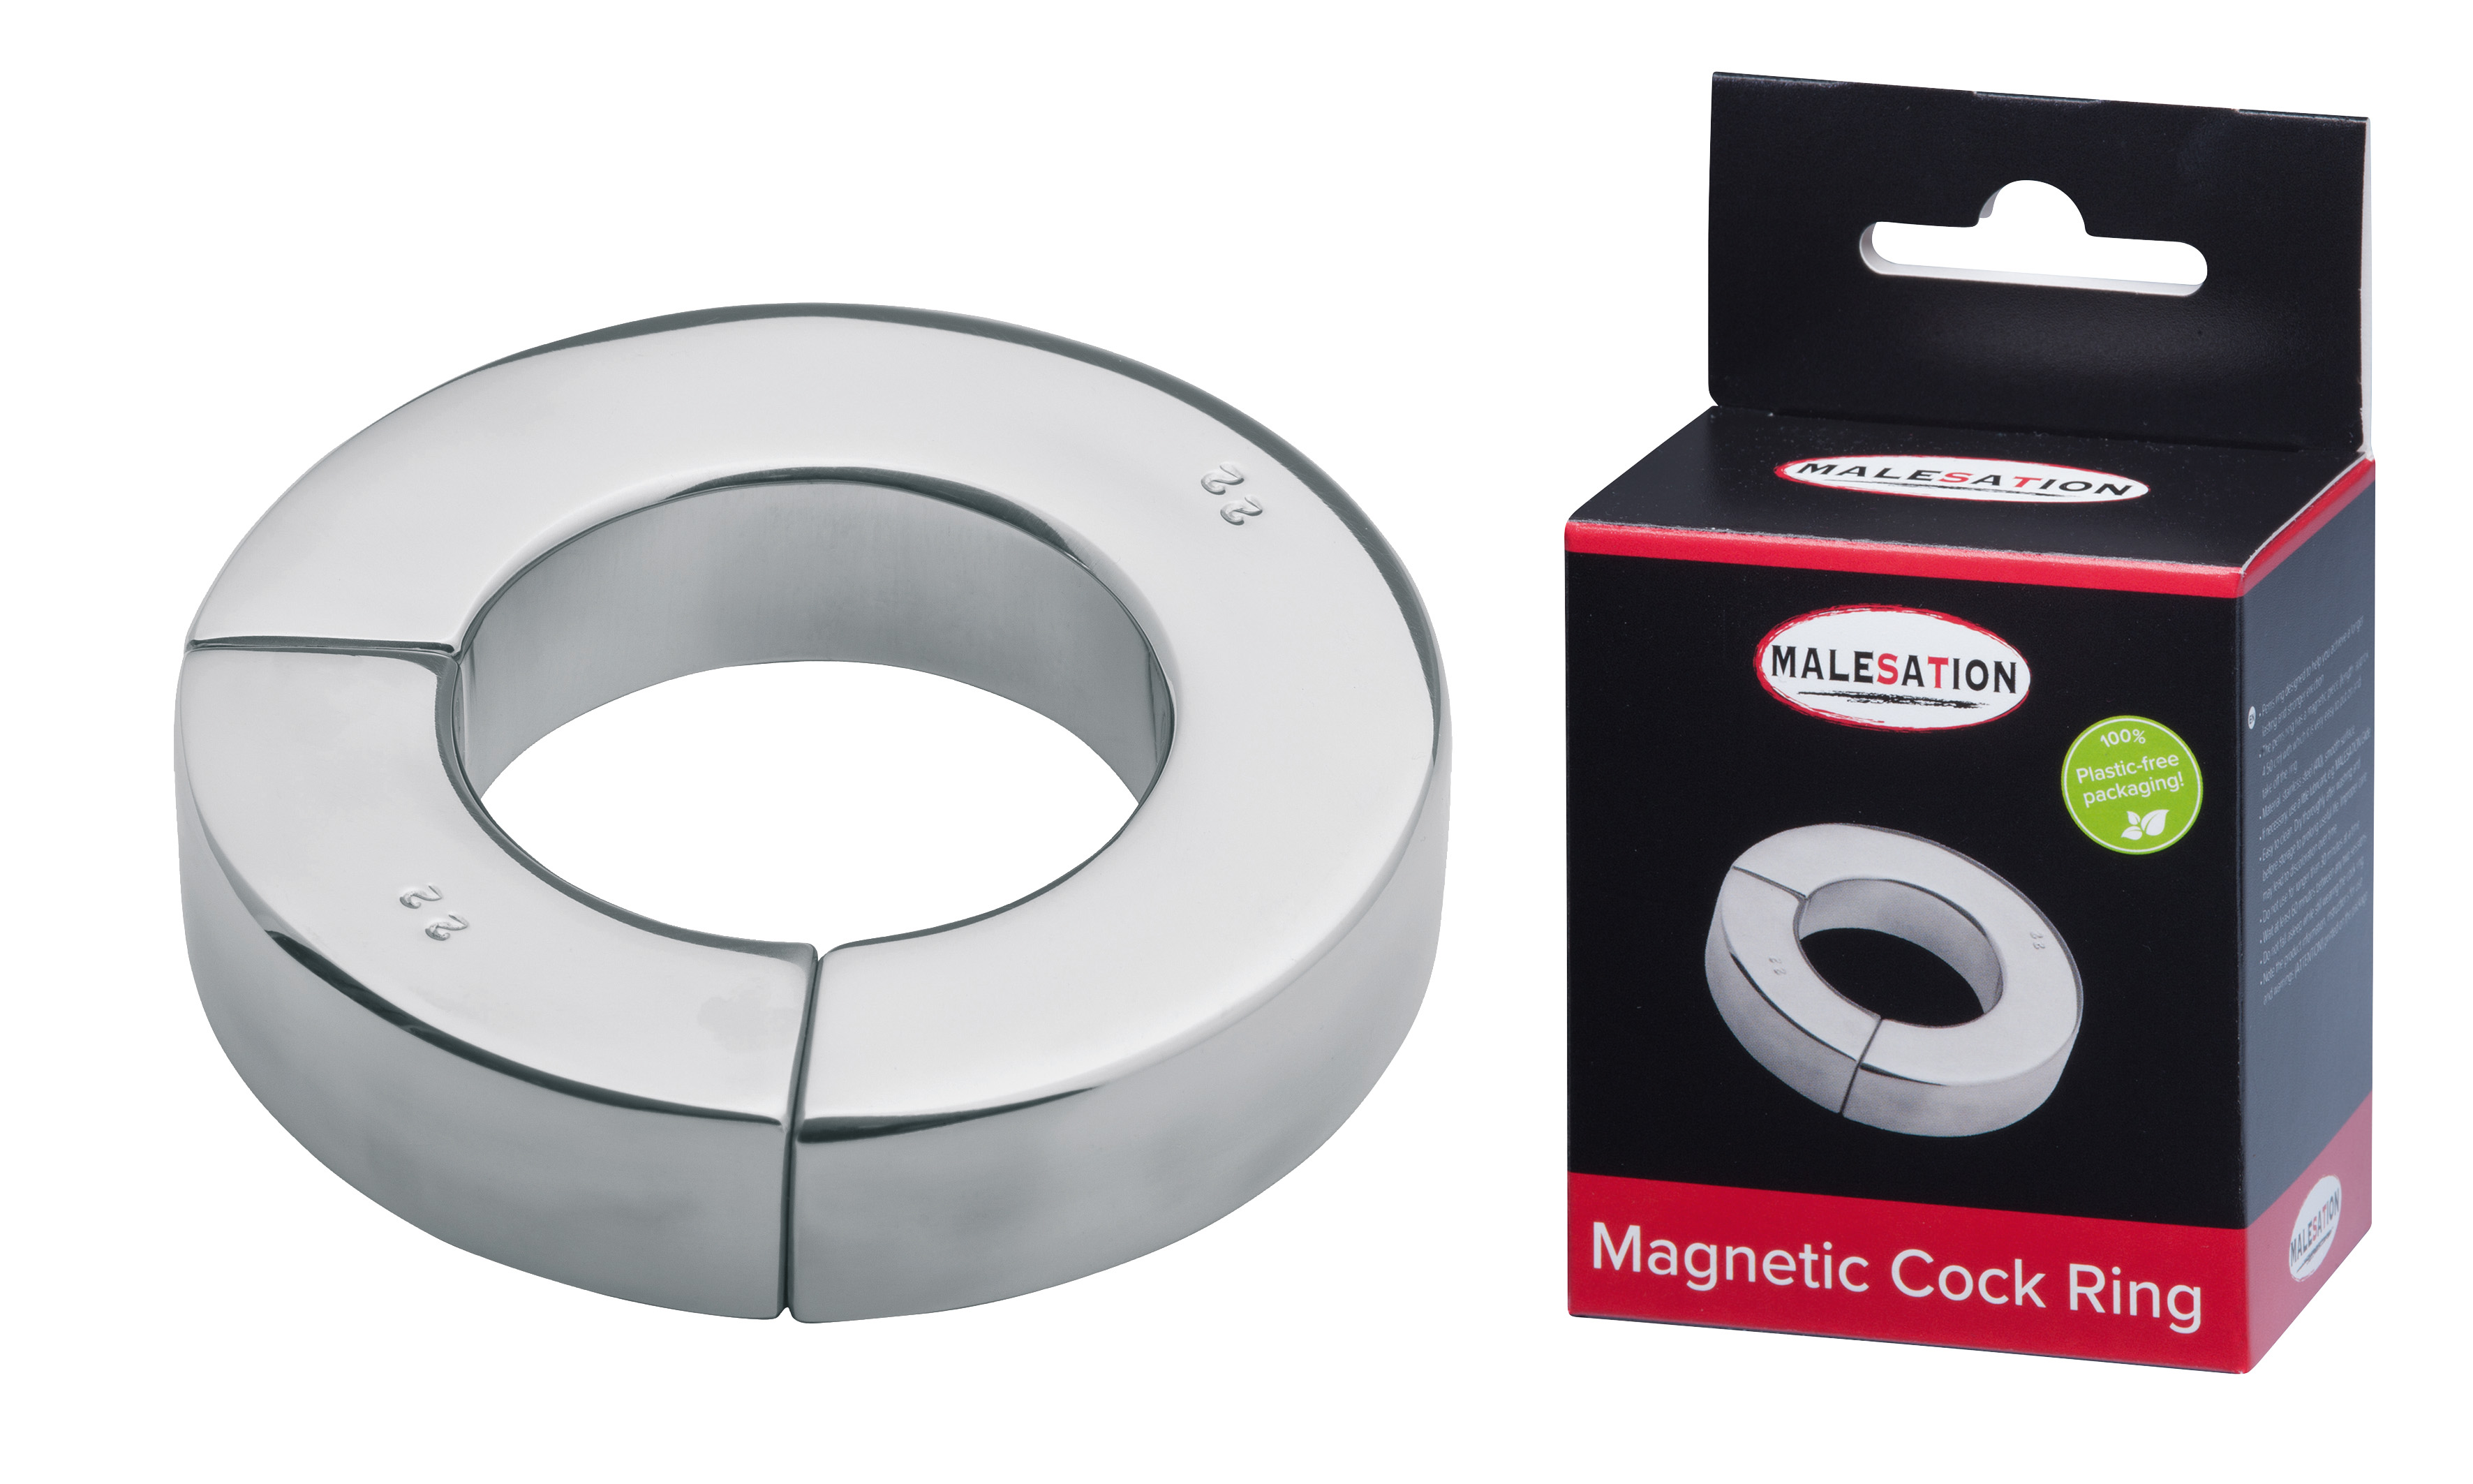 MALESATION Magnetic Cock Ring